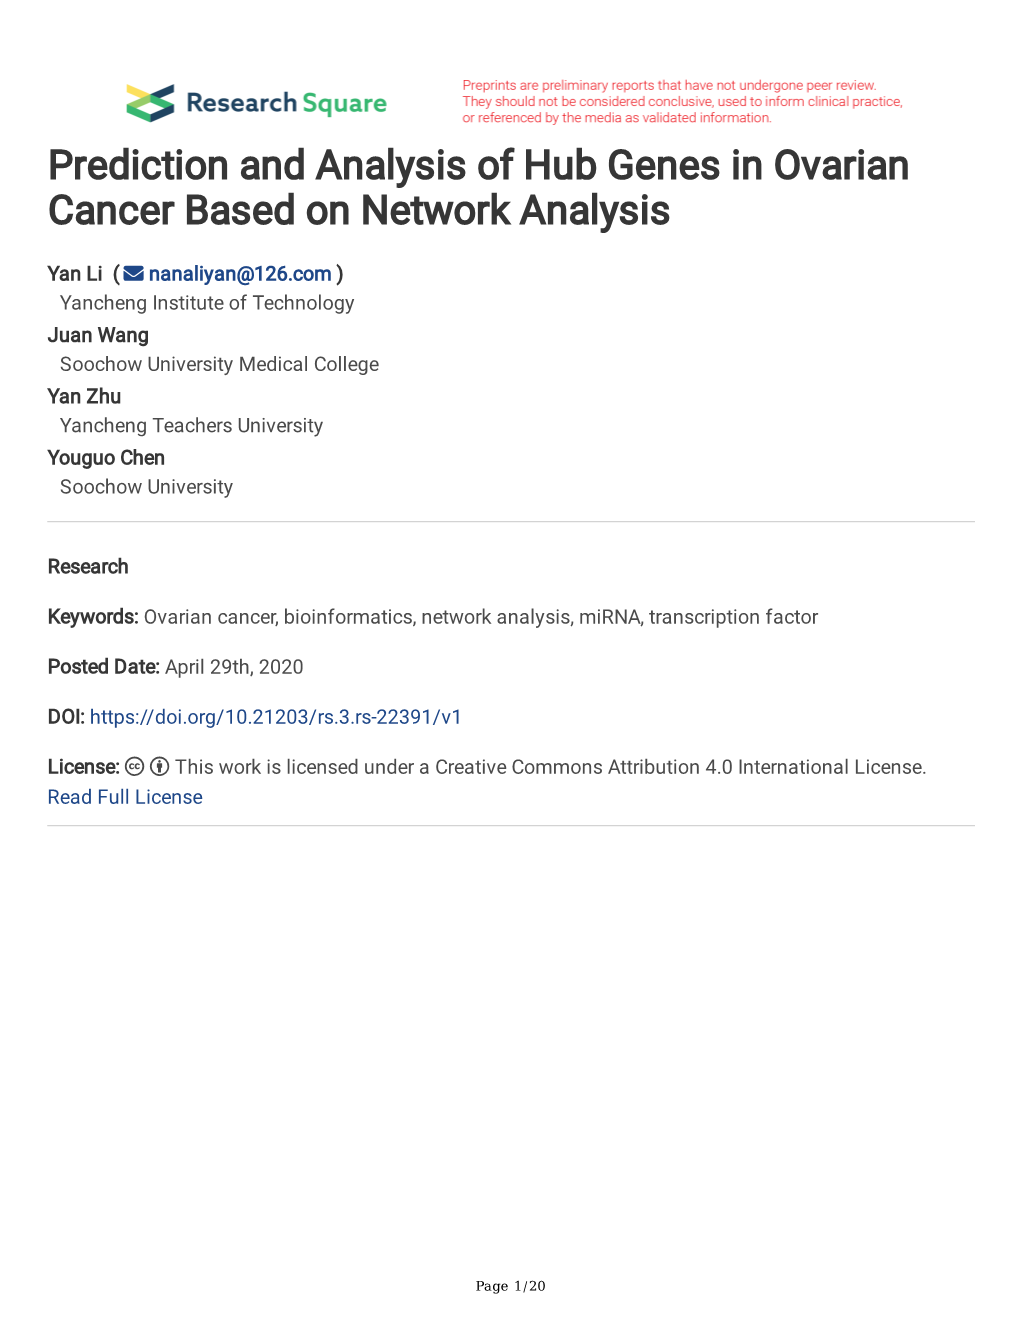 Prediction and Analysis of Hub Genes in Ovarian Cancer Based on Network Analysis